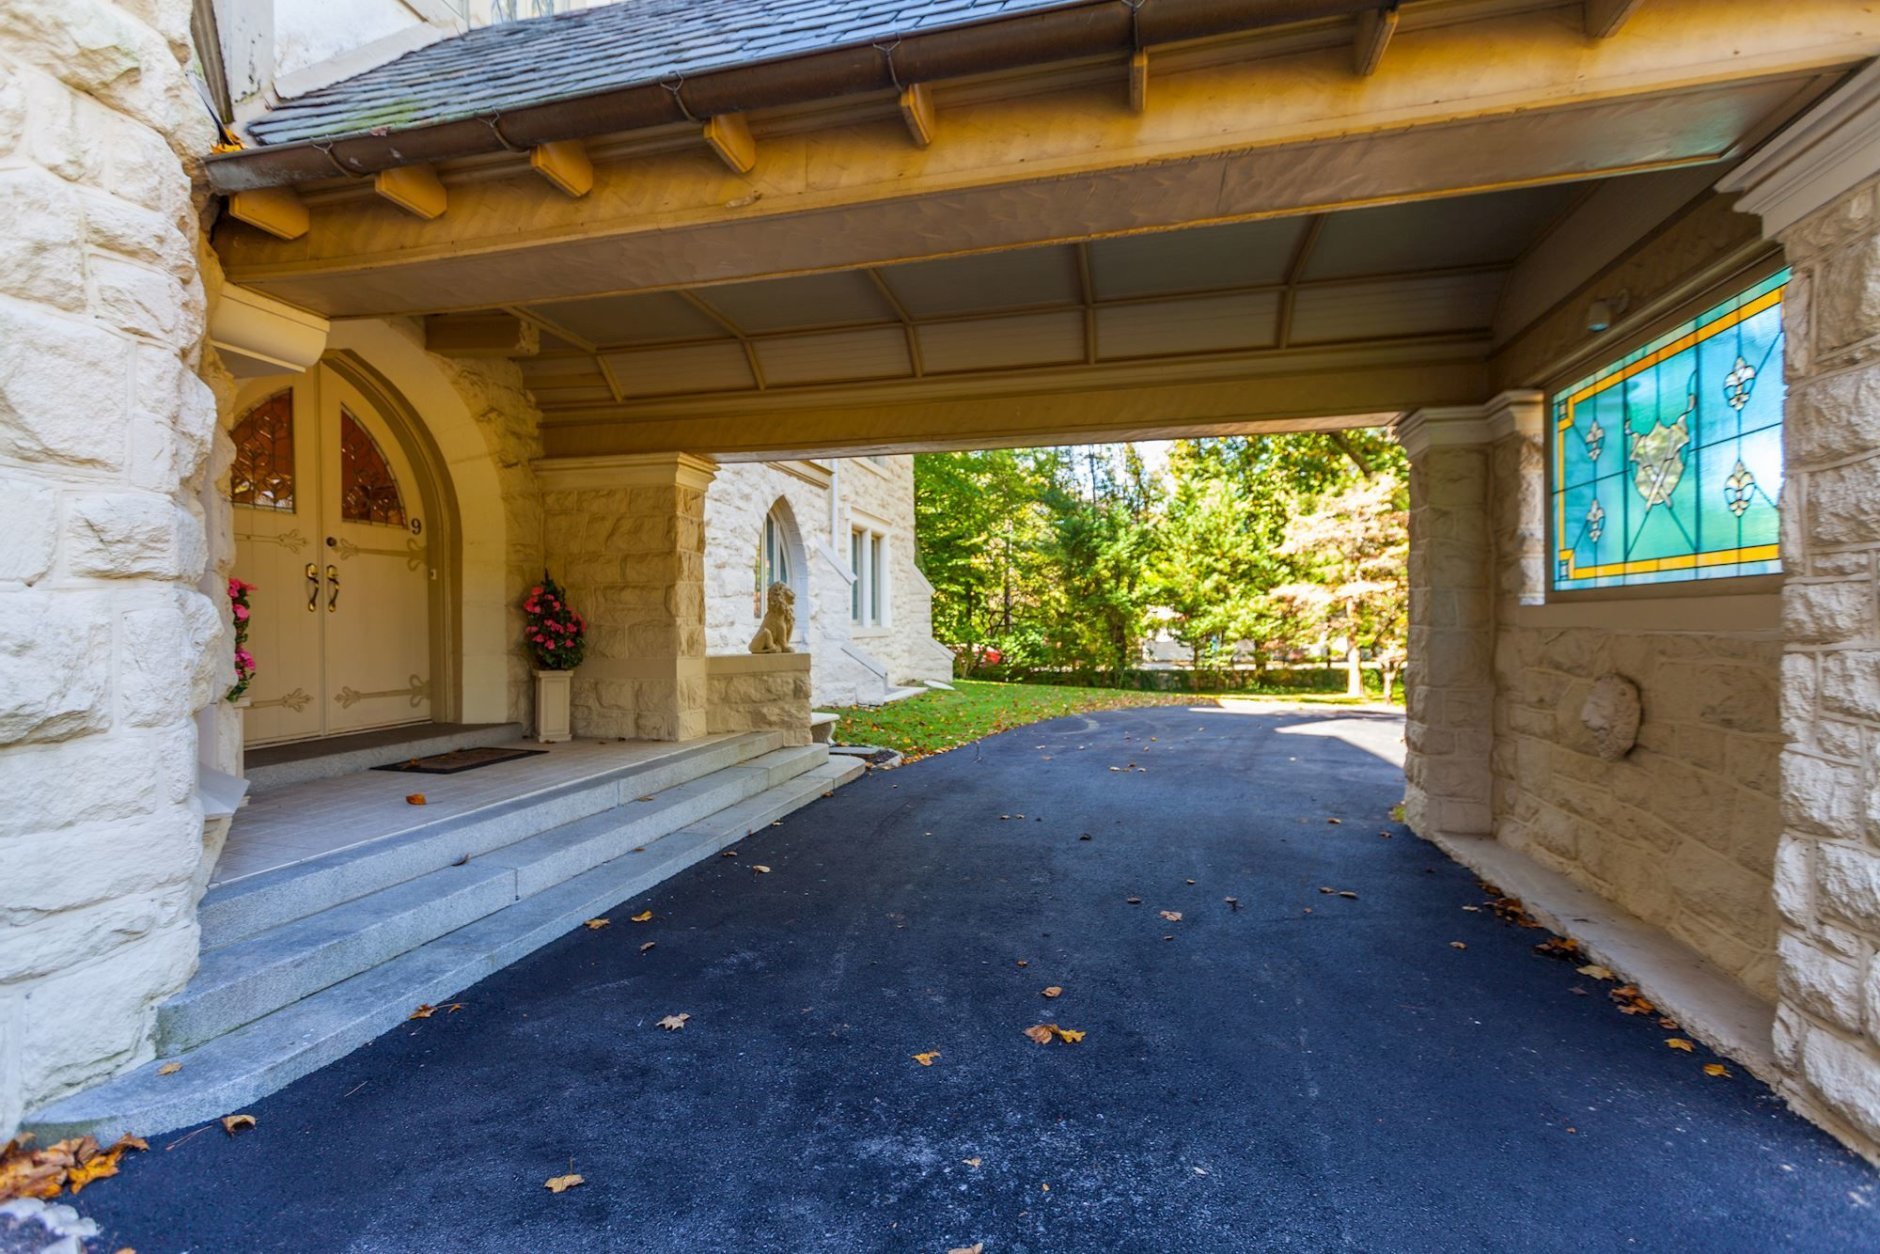 The listing said guests enter the home through a shielded porte cochere. (Courtesy Long & Foster)